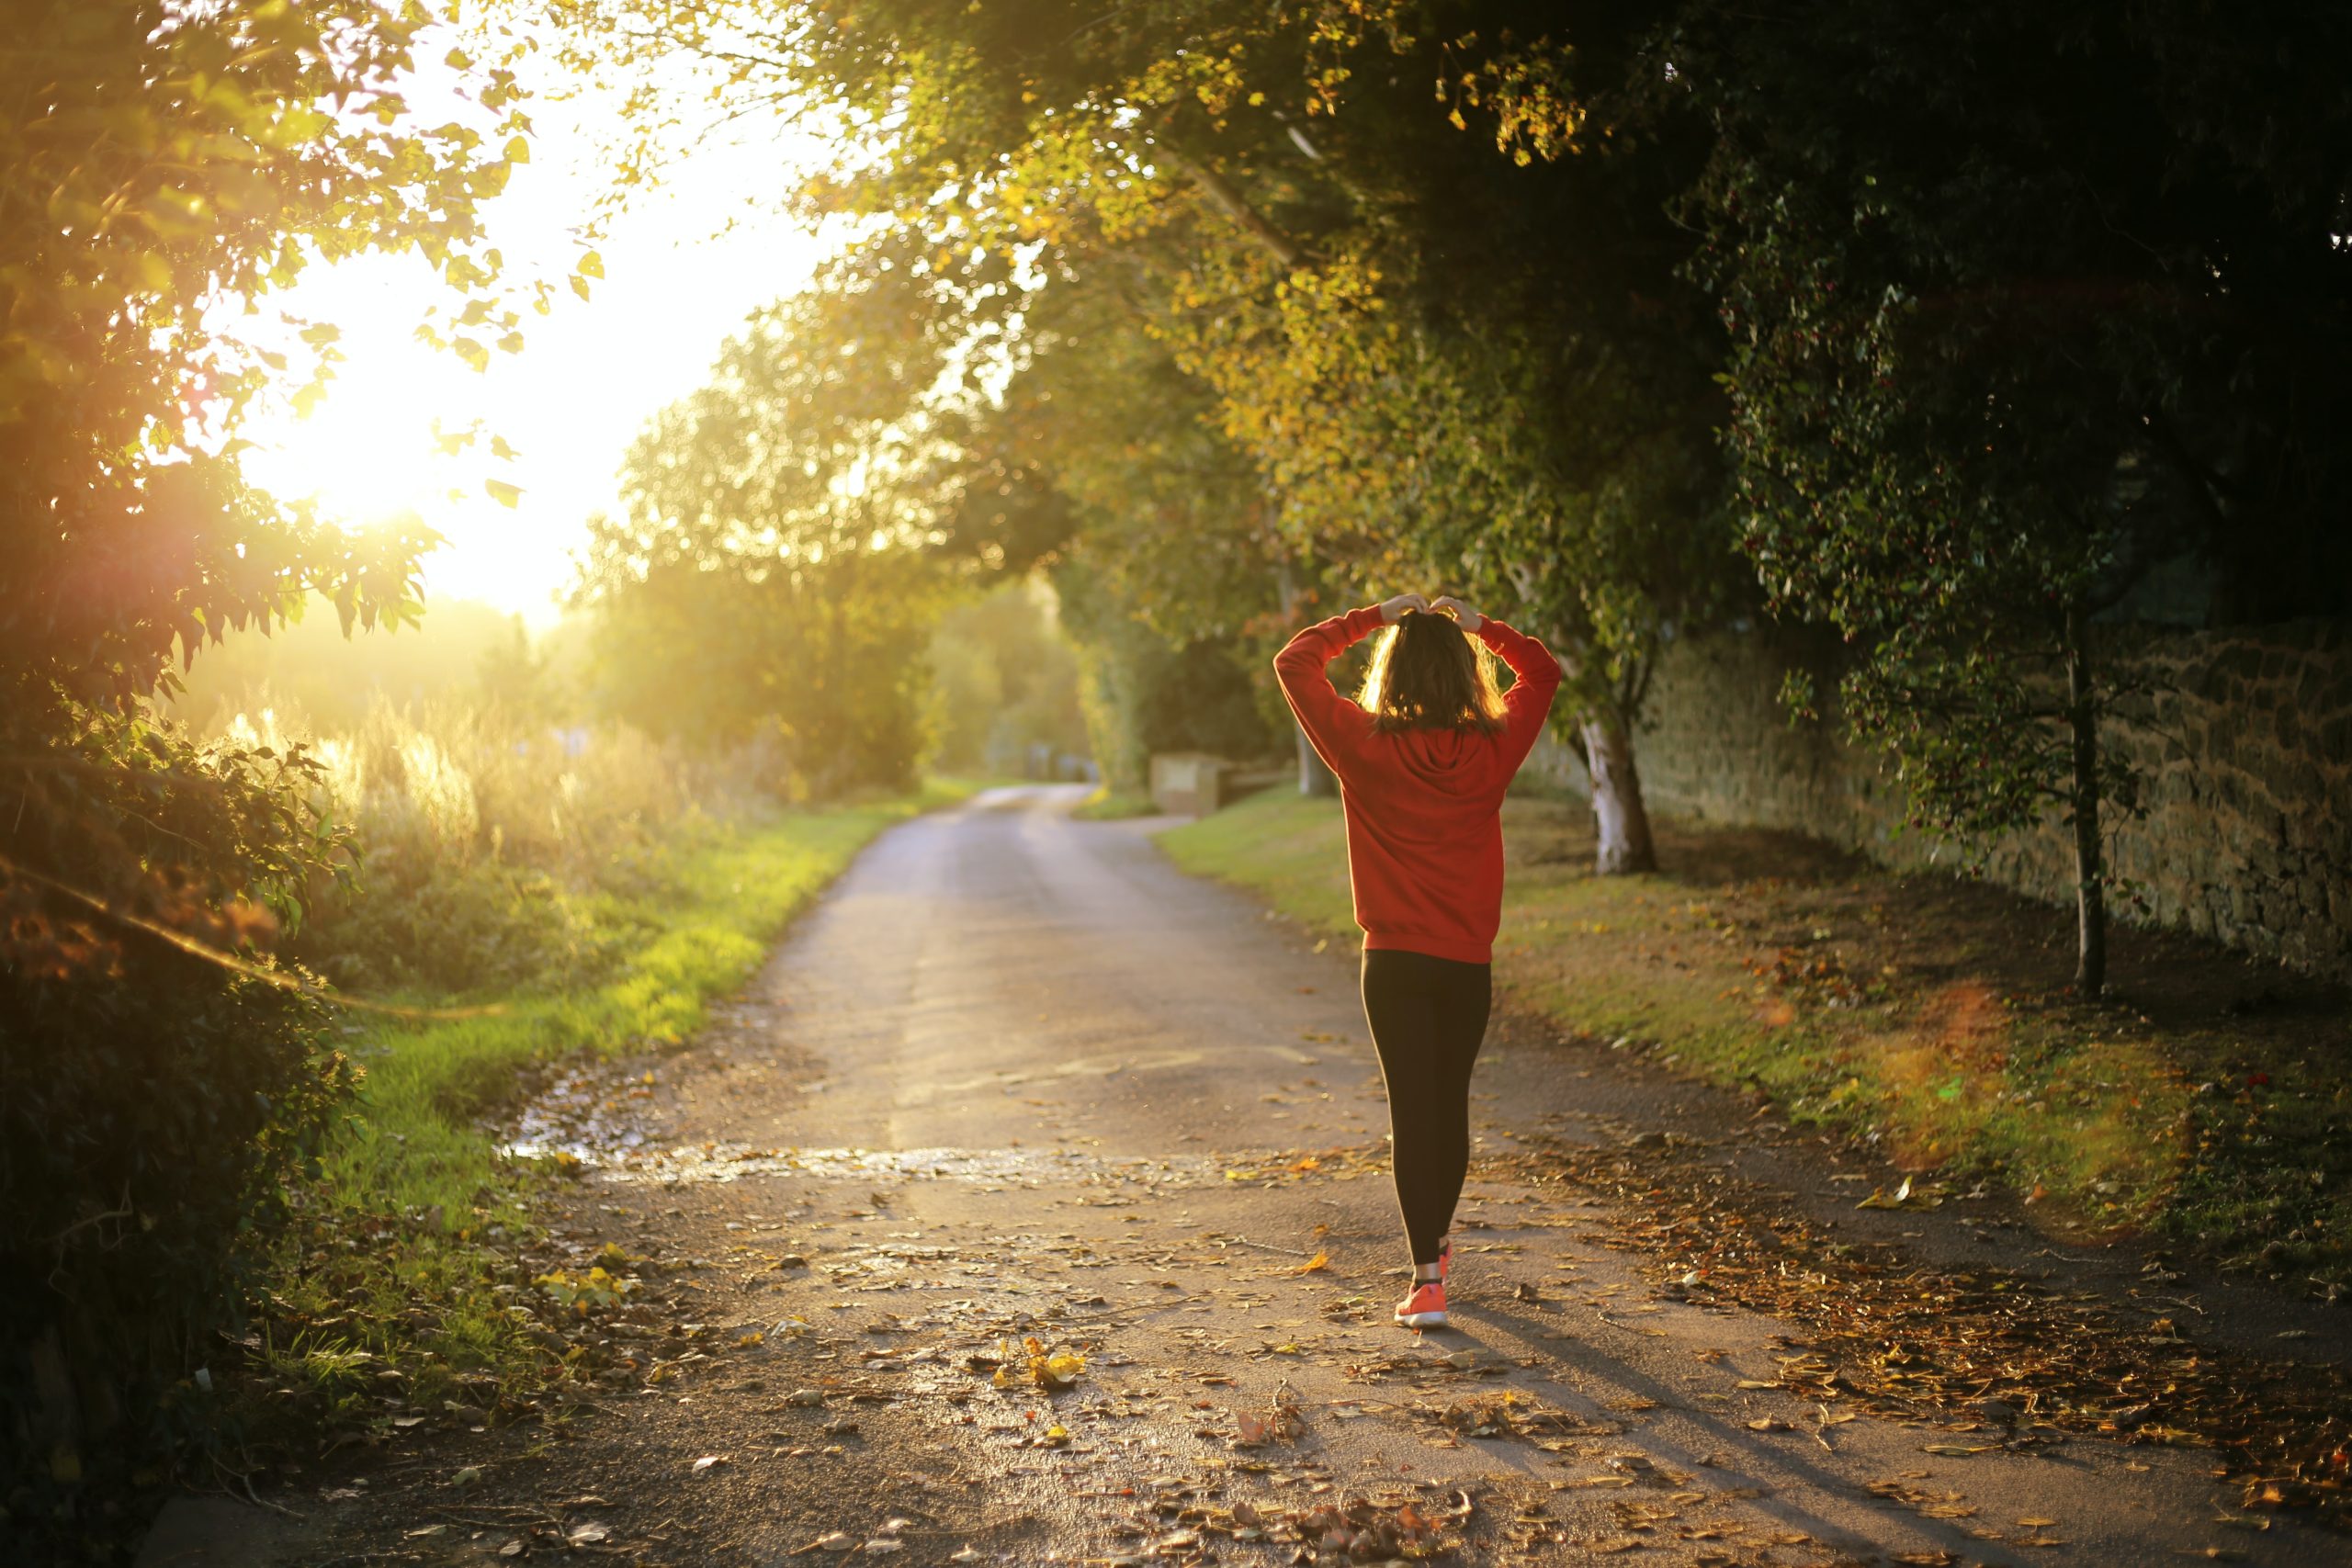 A woman walks down a running path with her hands on her head.